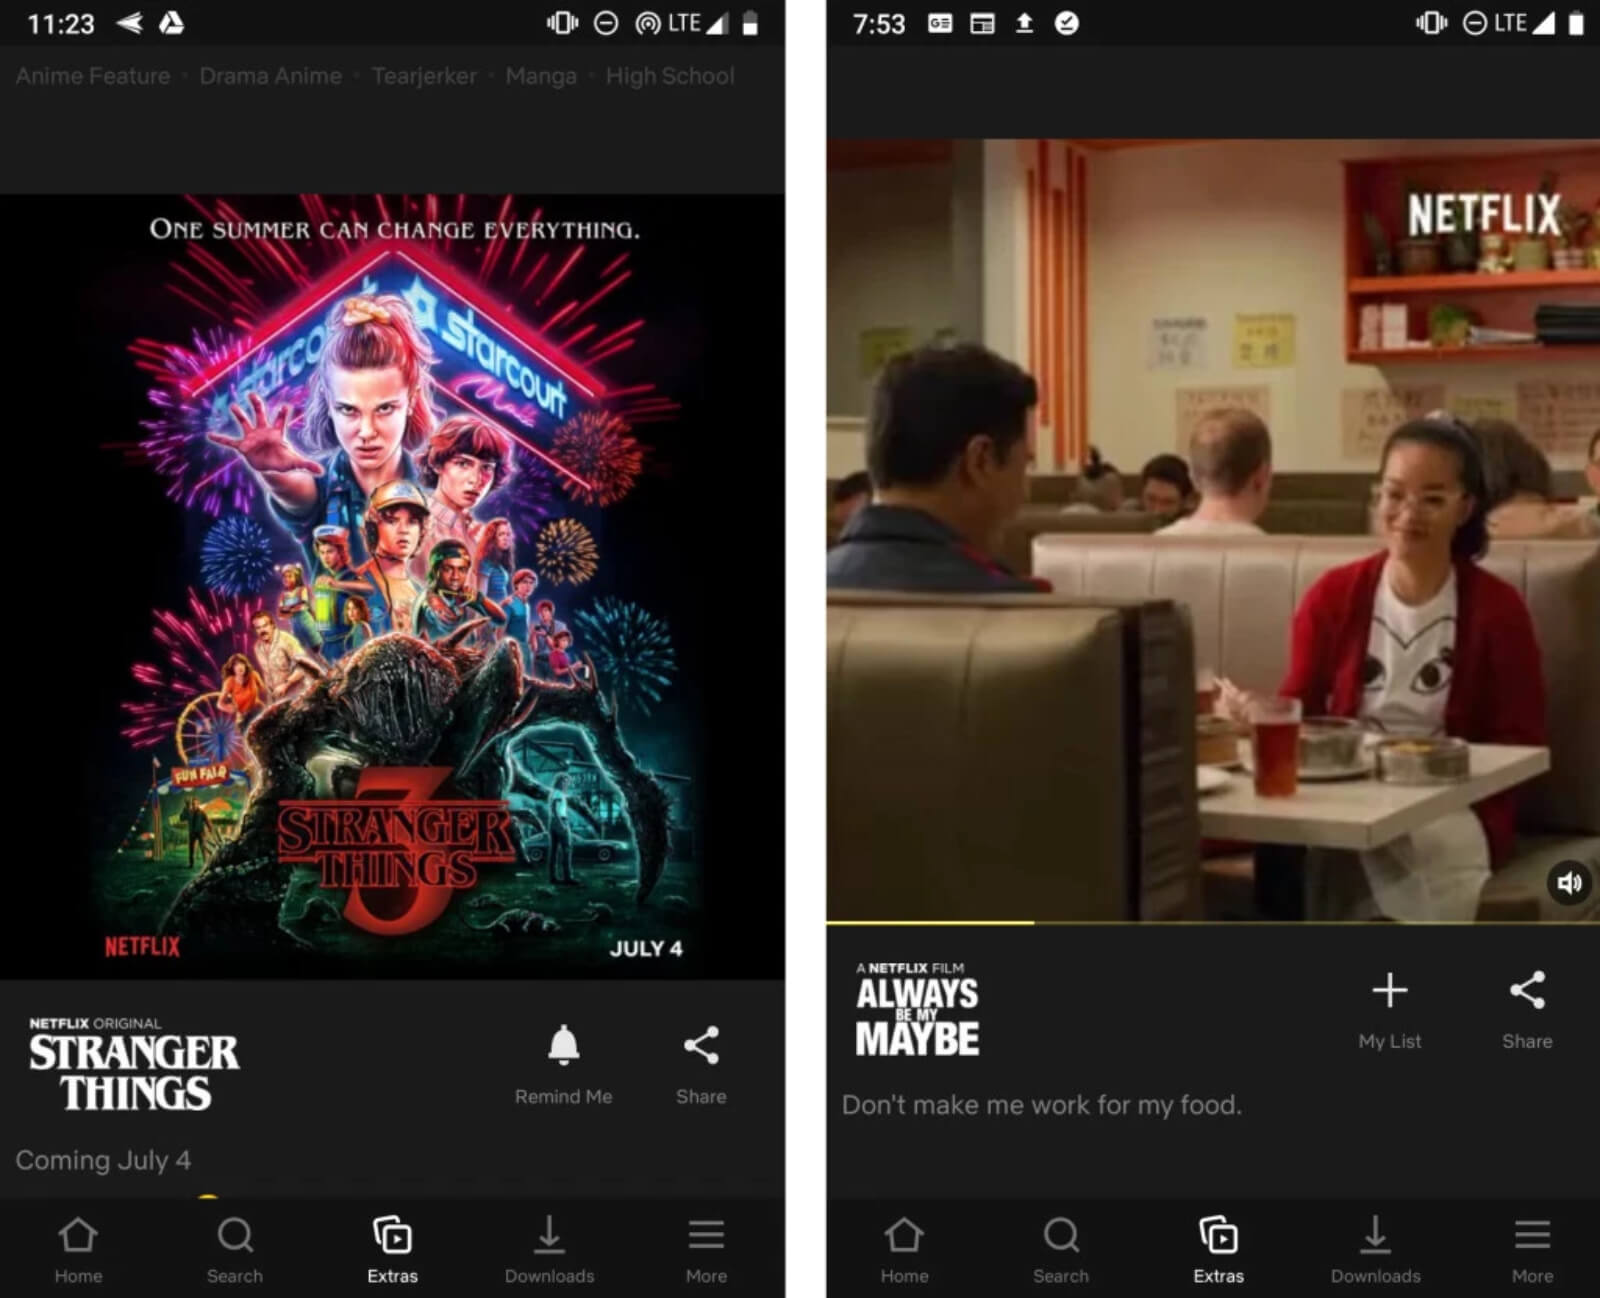 Netflix is testing Extras, an Instagram-style scrolling feed for its mobile app